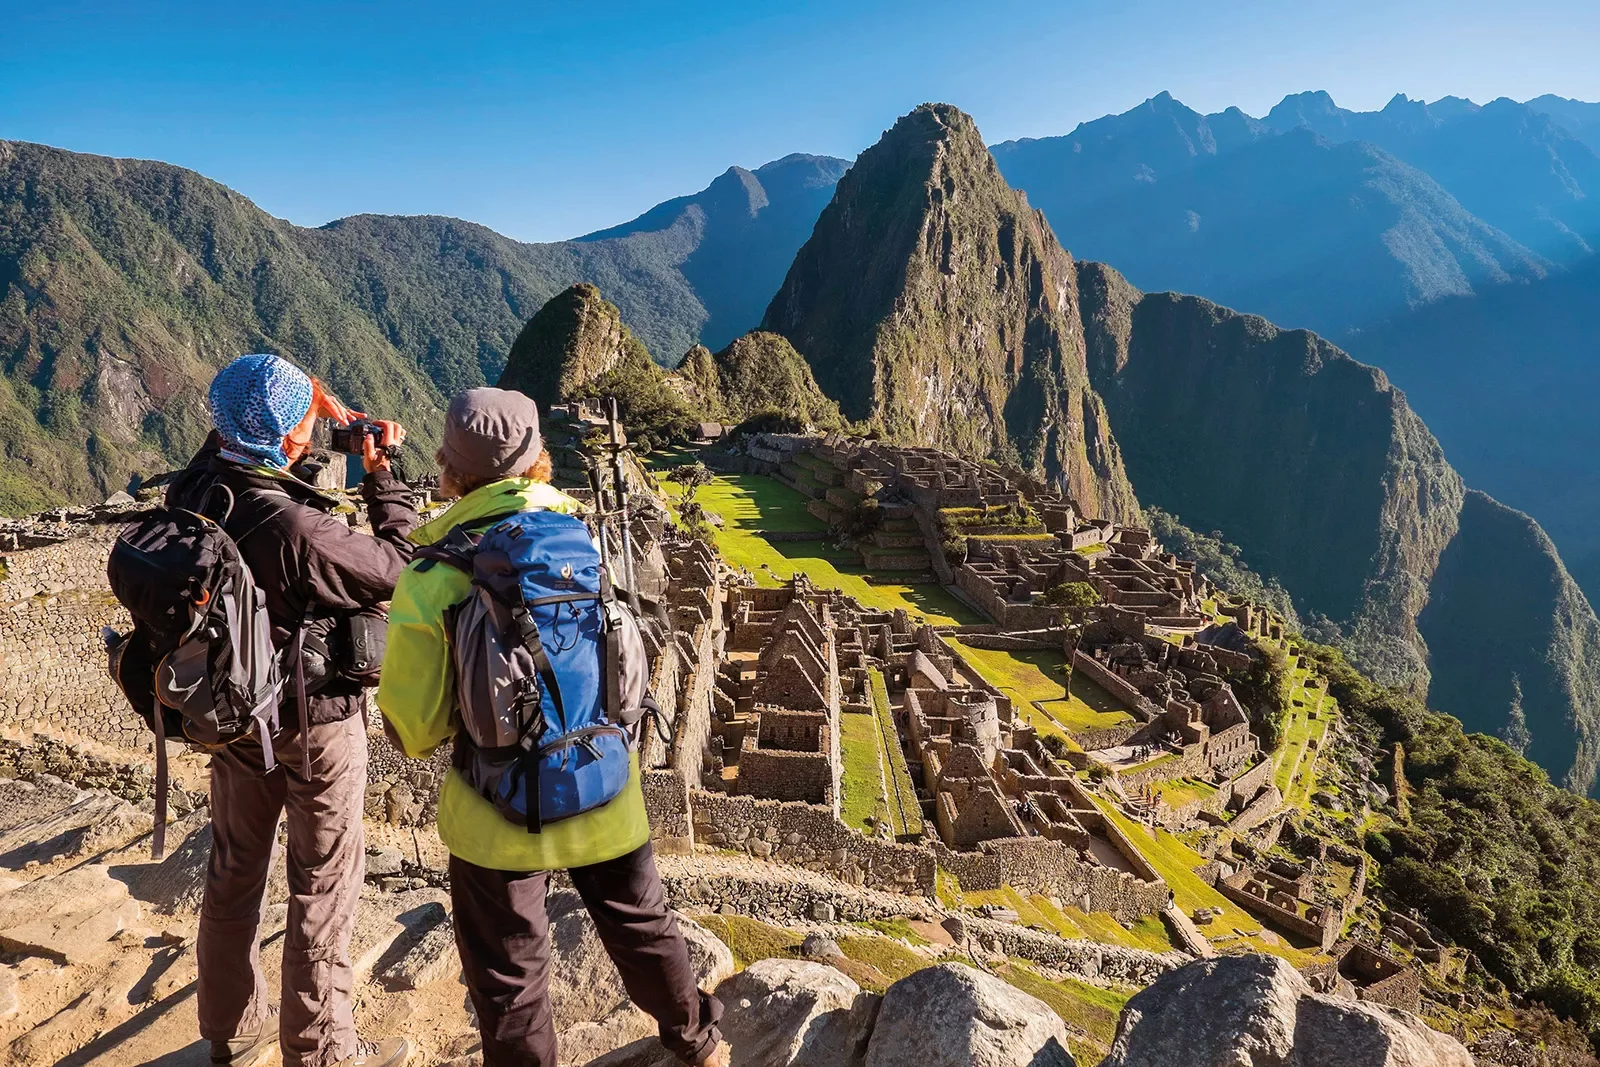 Two guests overlooking Machu Picchu vista.